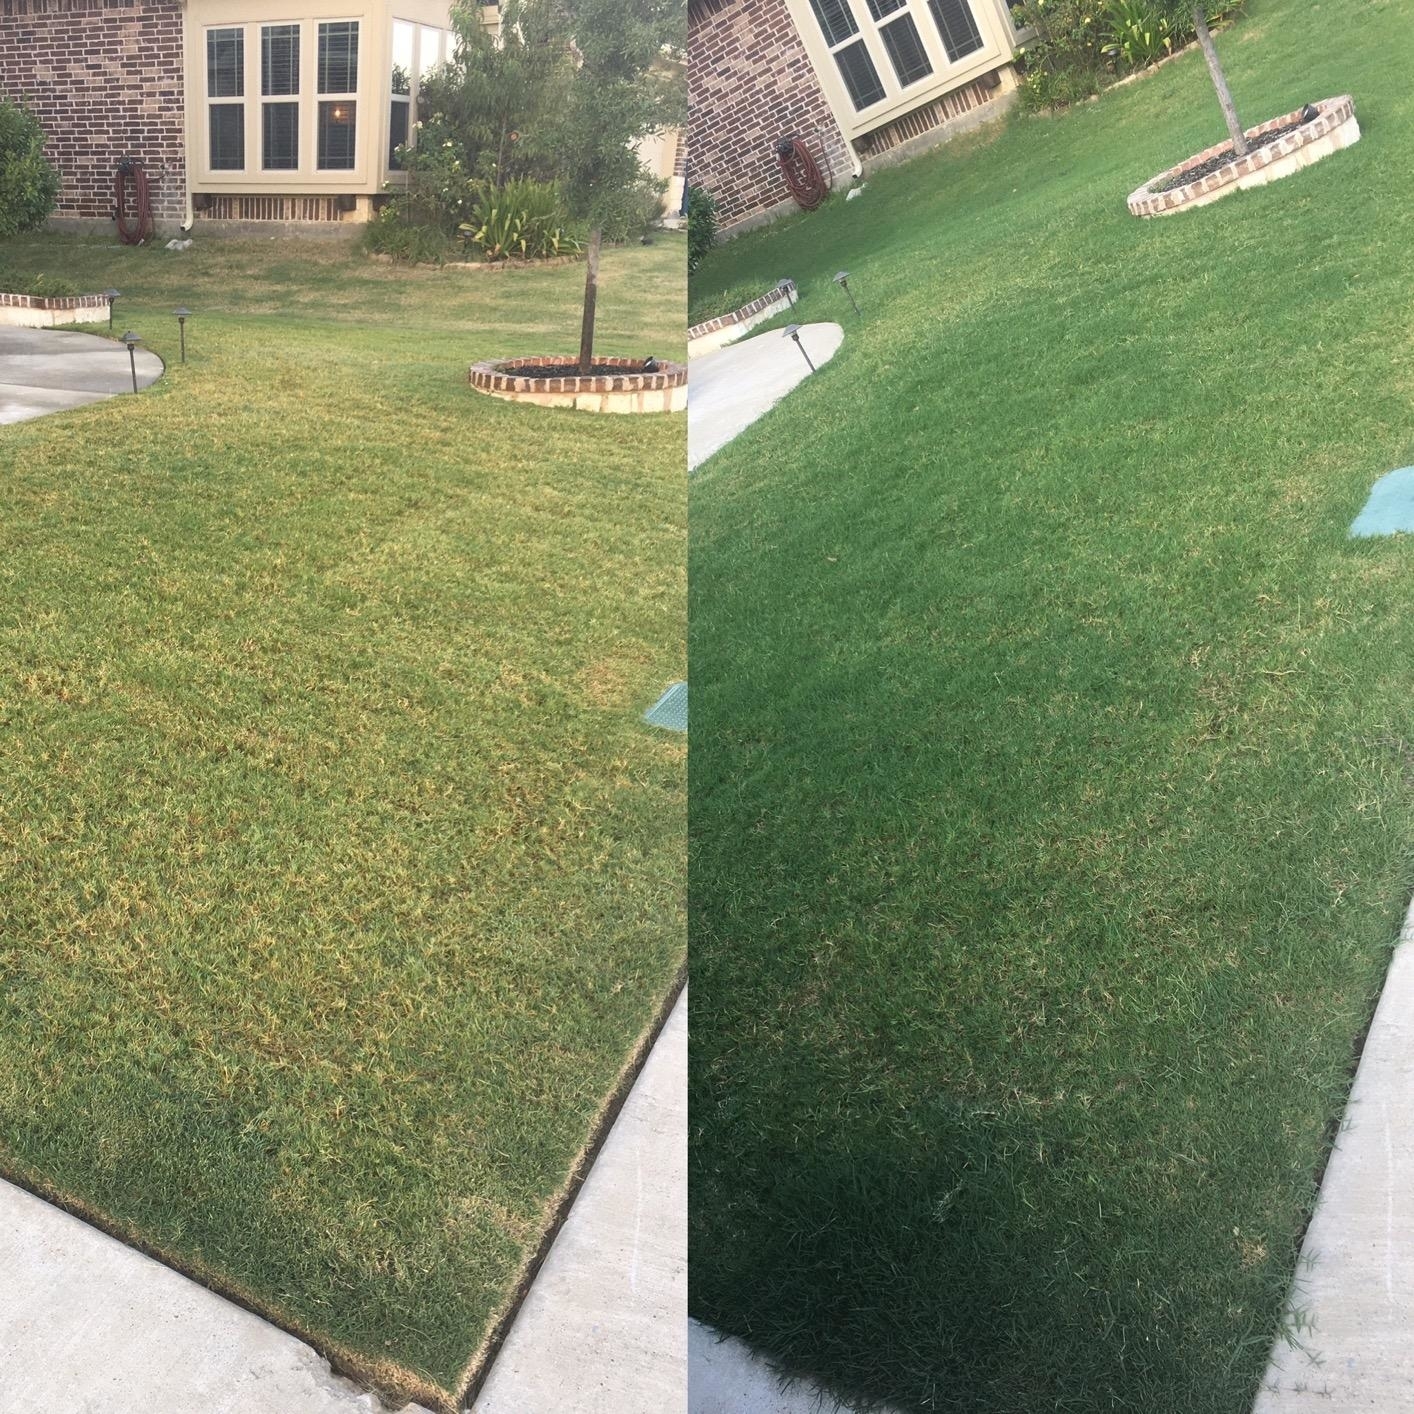 reviewer&#x27;s dry, yellow lawn before using the fertilizer next to an image of the same lawn looking think and green after using the fertilizer